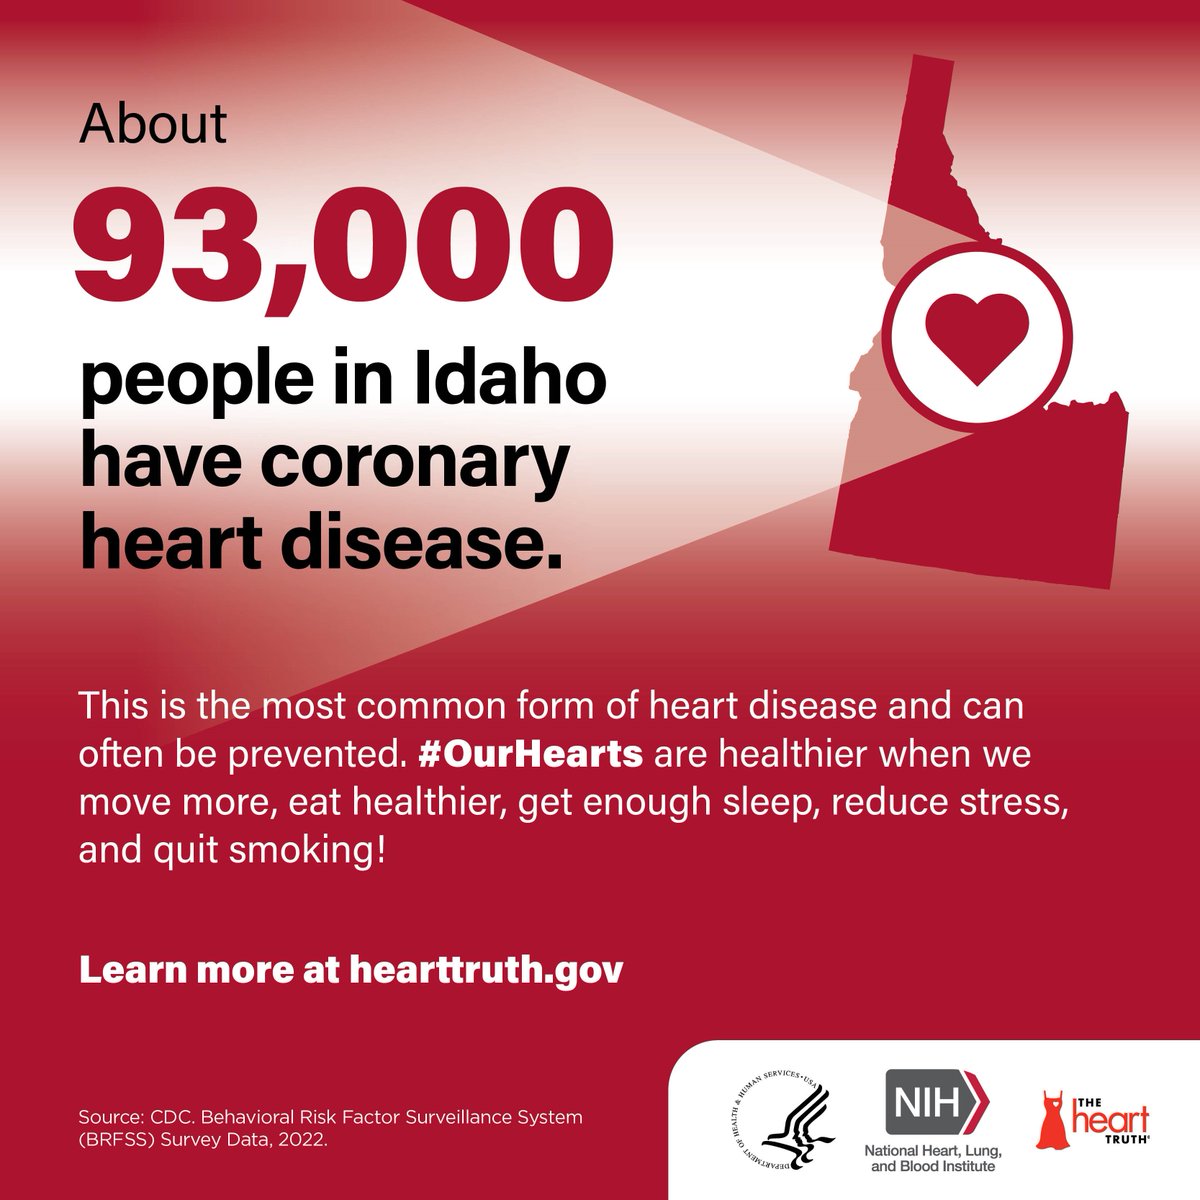 Today is National Idaho Day! About 93,000 people in the Gem State have #HeartDisease. Know your risk so your heart health can shine. go.nih.gov/G1OTgd3
@IDHW